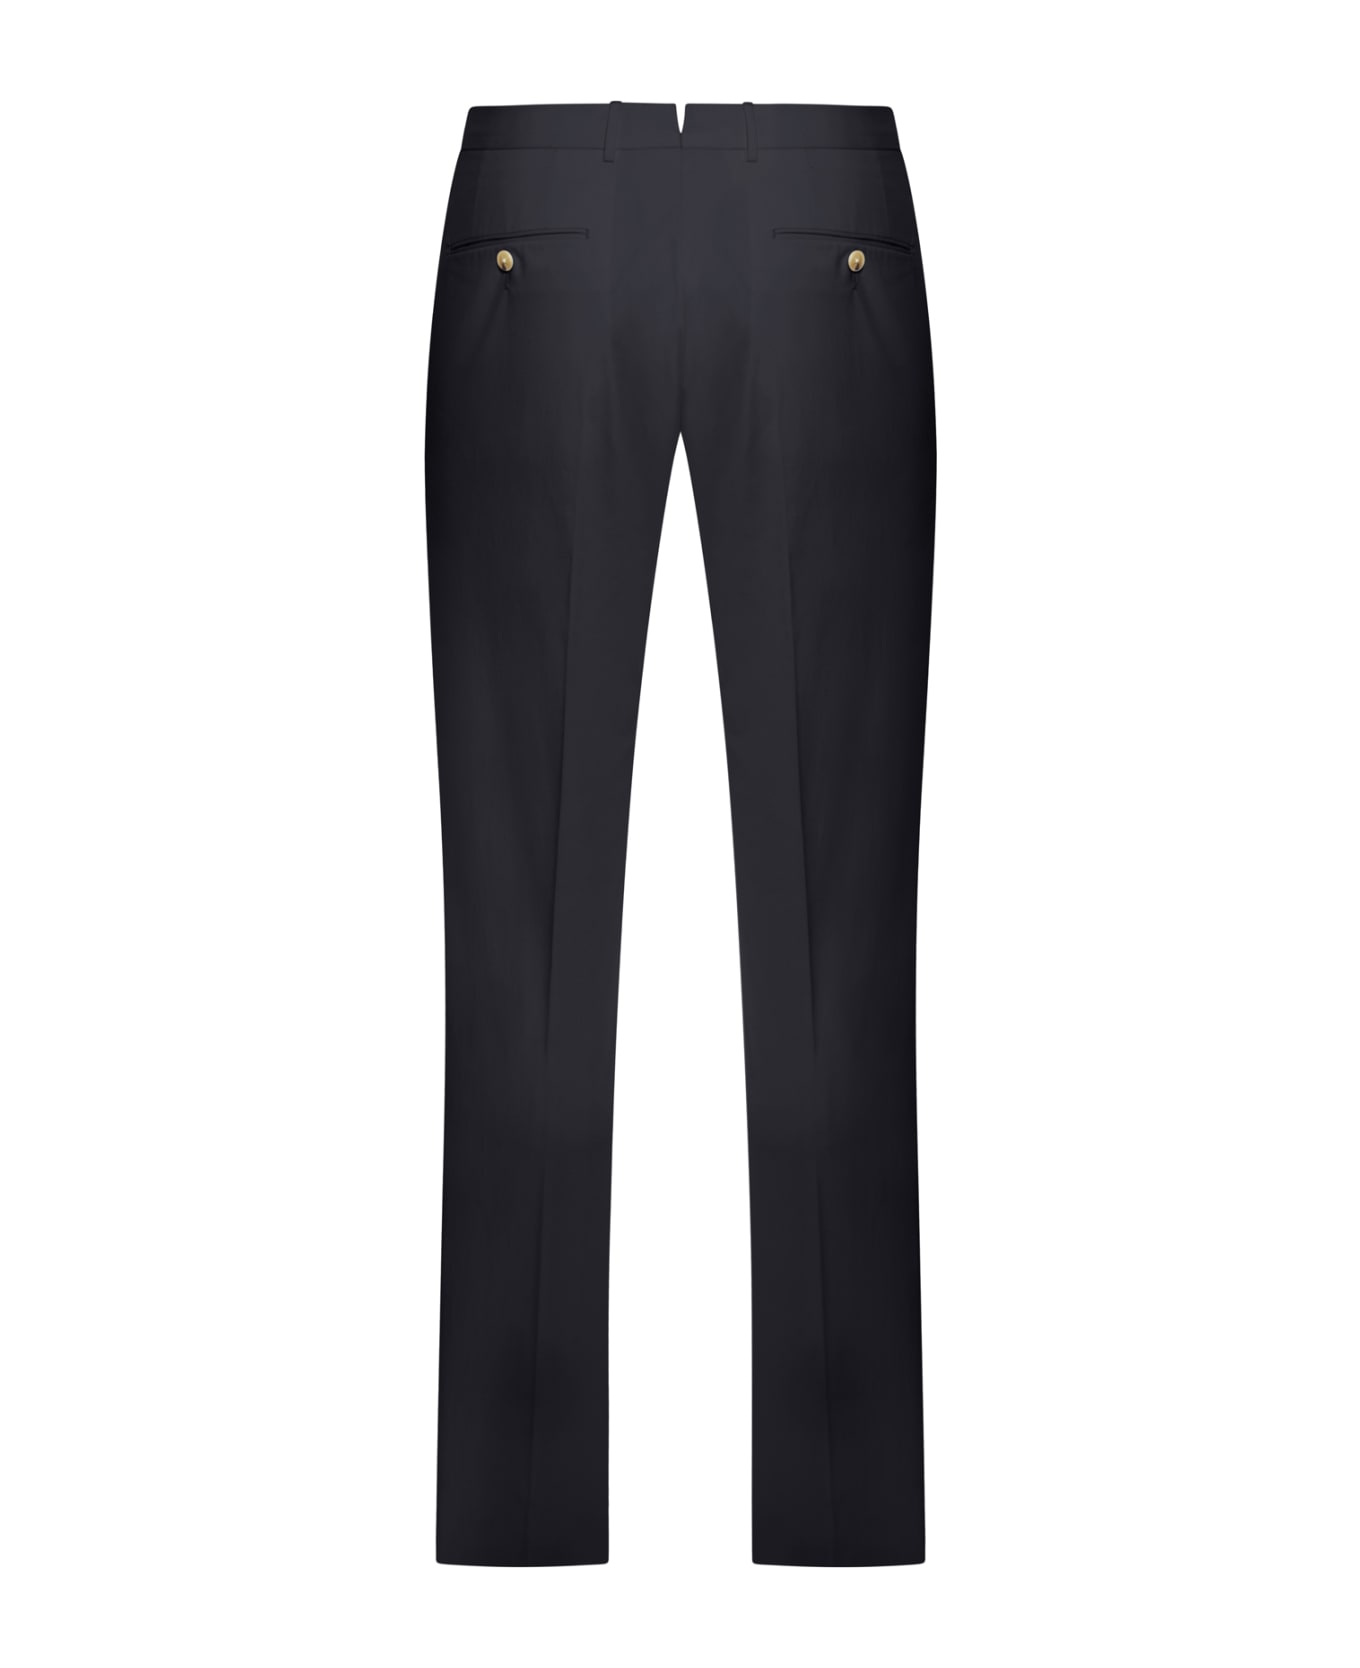 Zegna Trousers - Nvy Sld Navy